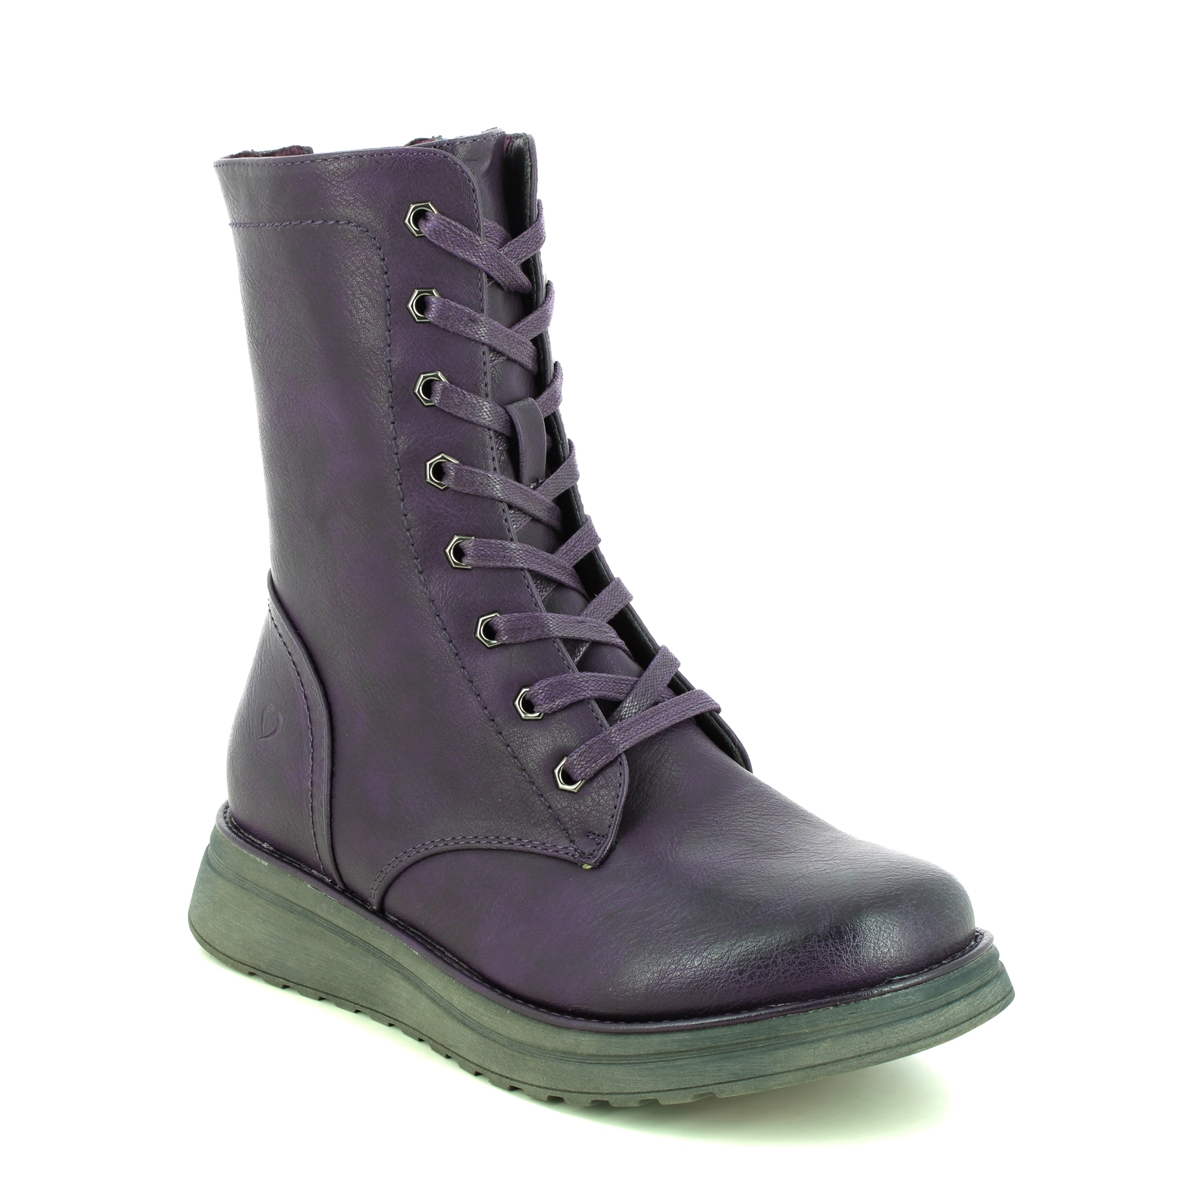 Heavenly Feet Martina Walker Purple Womens Lace Up Boots 3509-95 in a Plain Man-made in Size 5